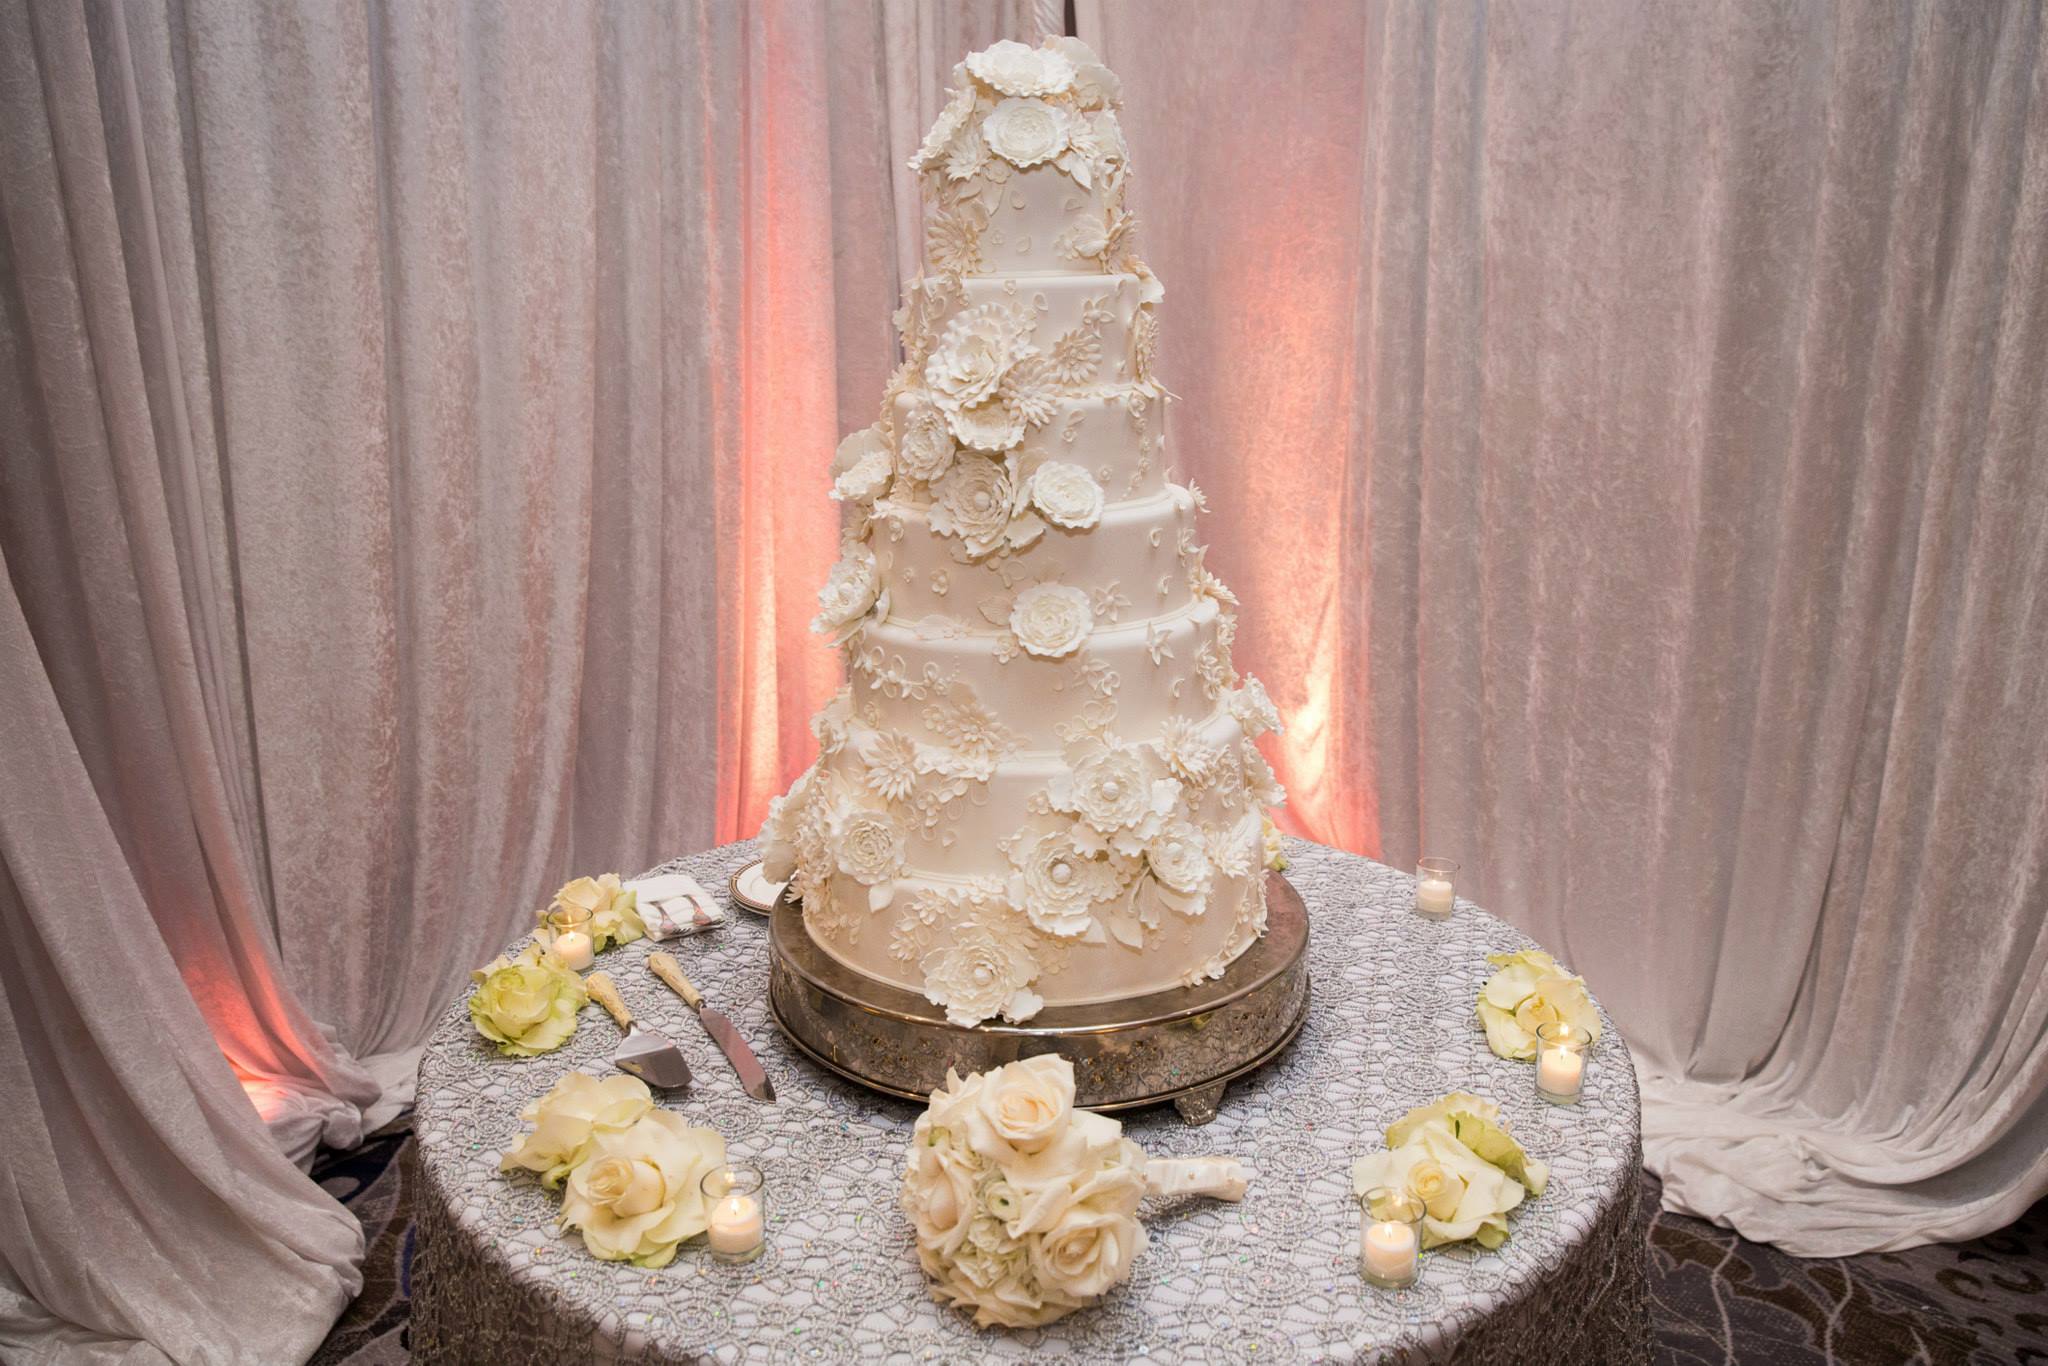 cake-of-dreams-hand-made-sugar-flowers-the-polo-club-boca-raton-wedding-reception-pastry-chef-luxe-wedding-artist-ben-keys-wed-on-canvas